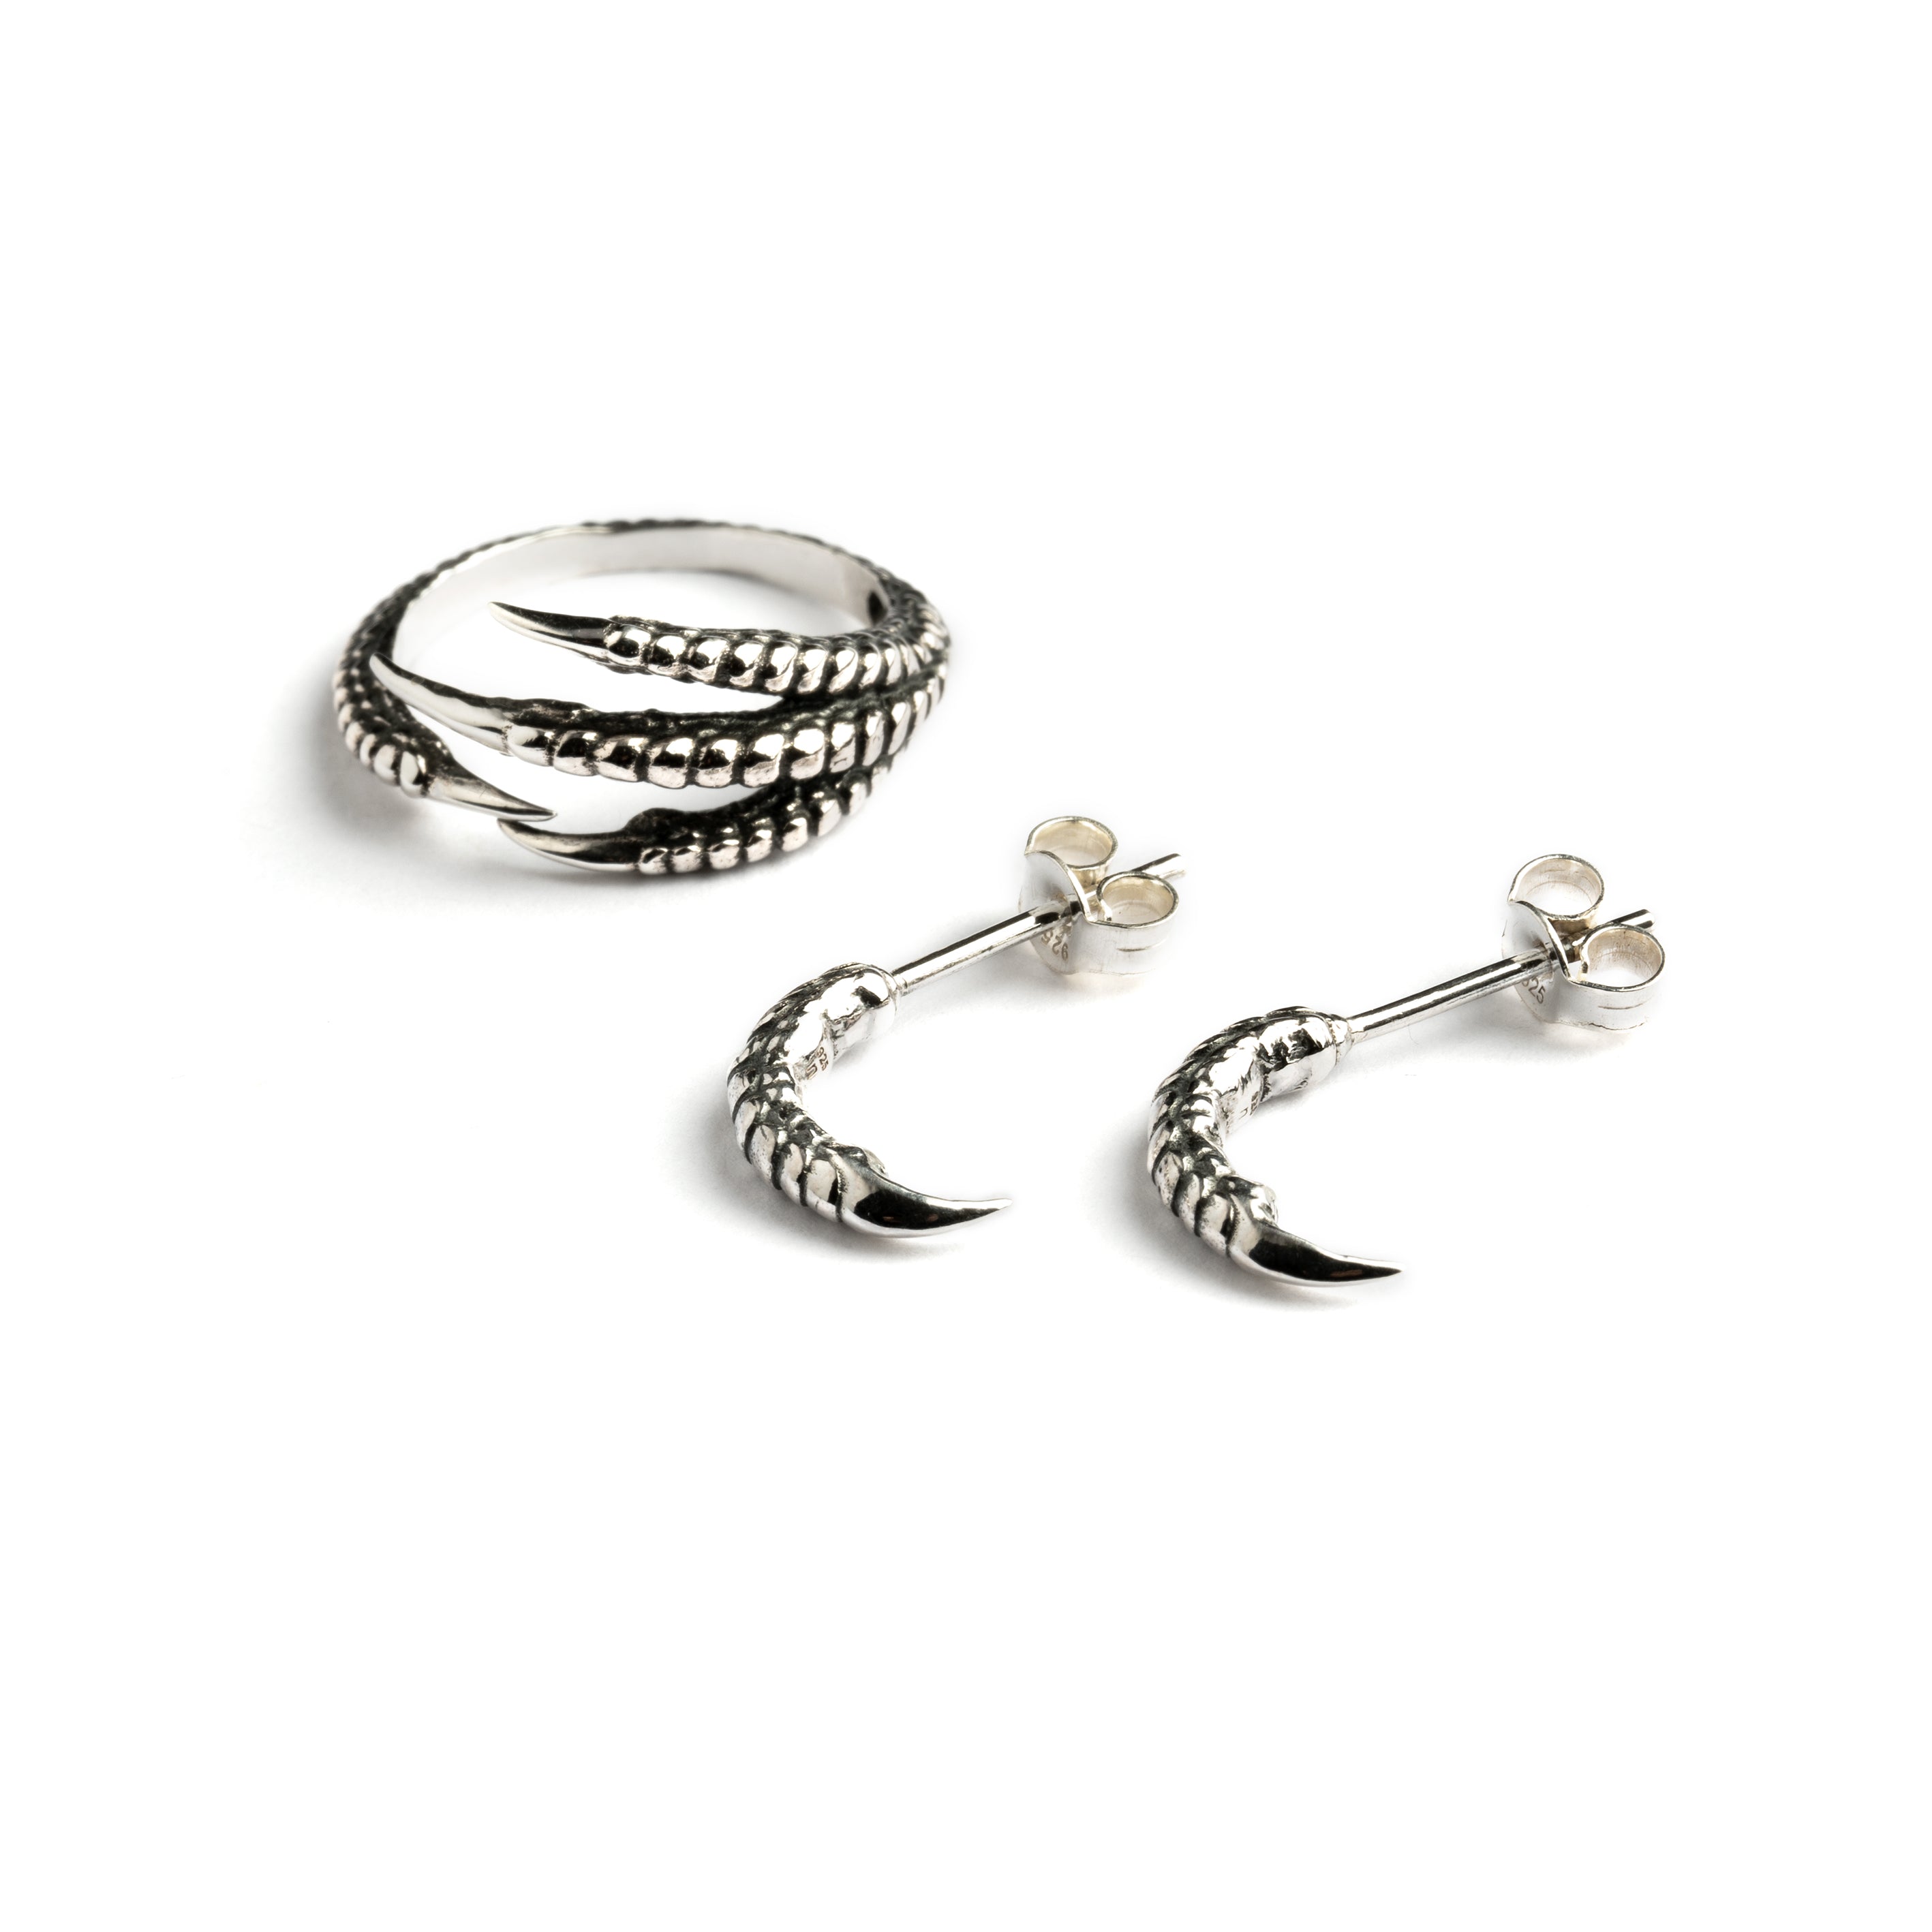 Silver Talon Earrings and bird claw ring